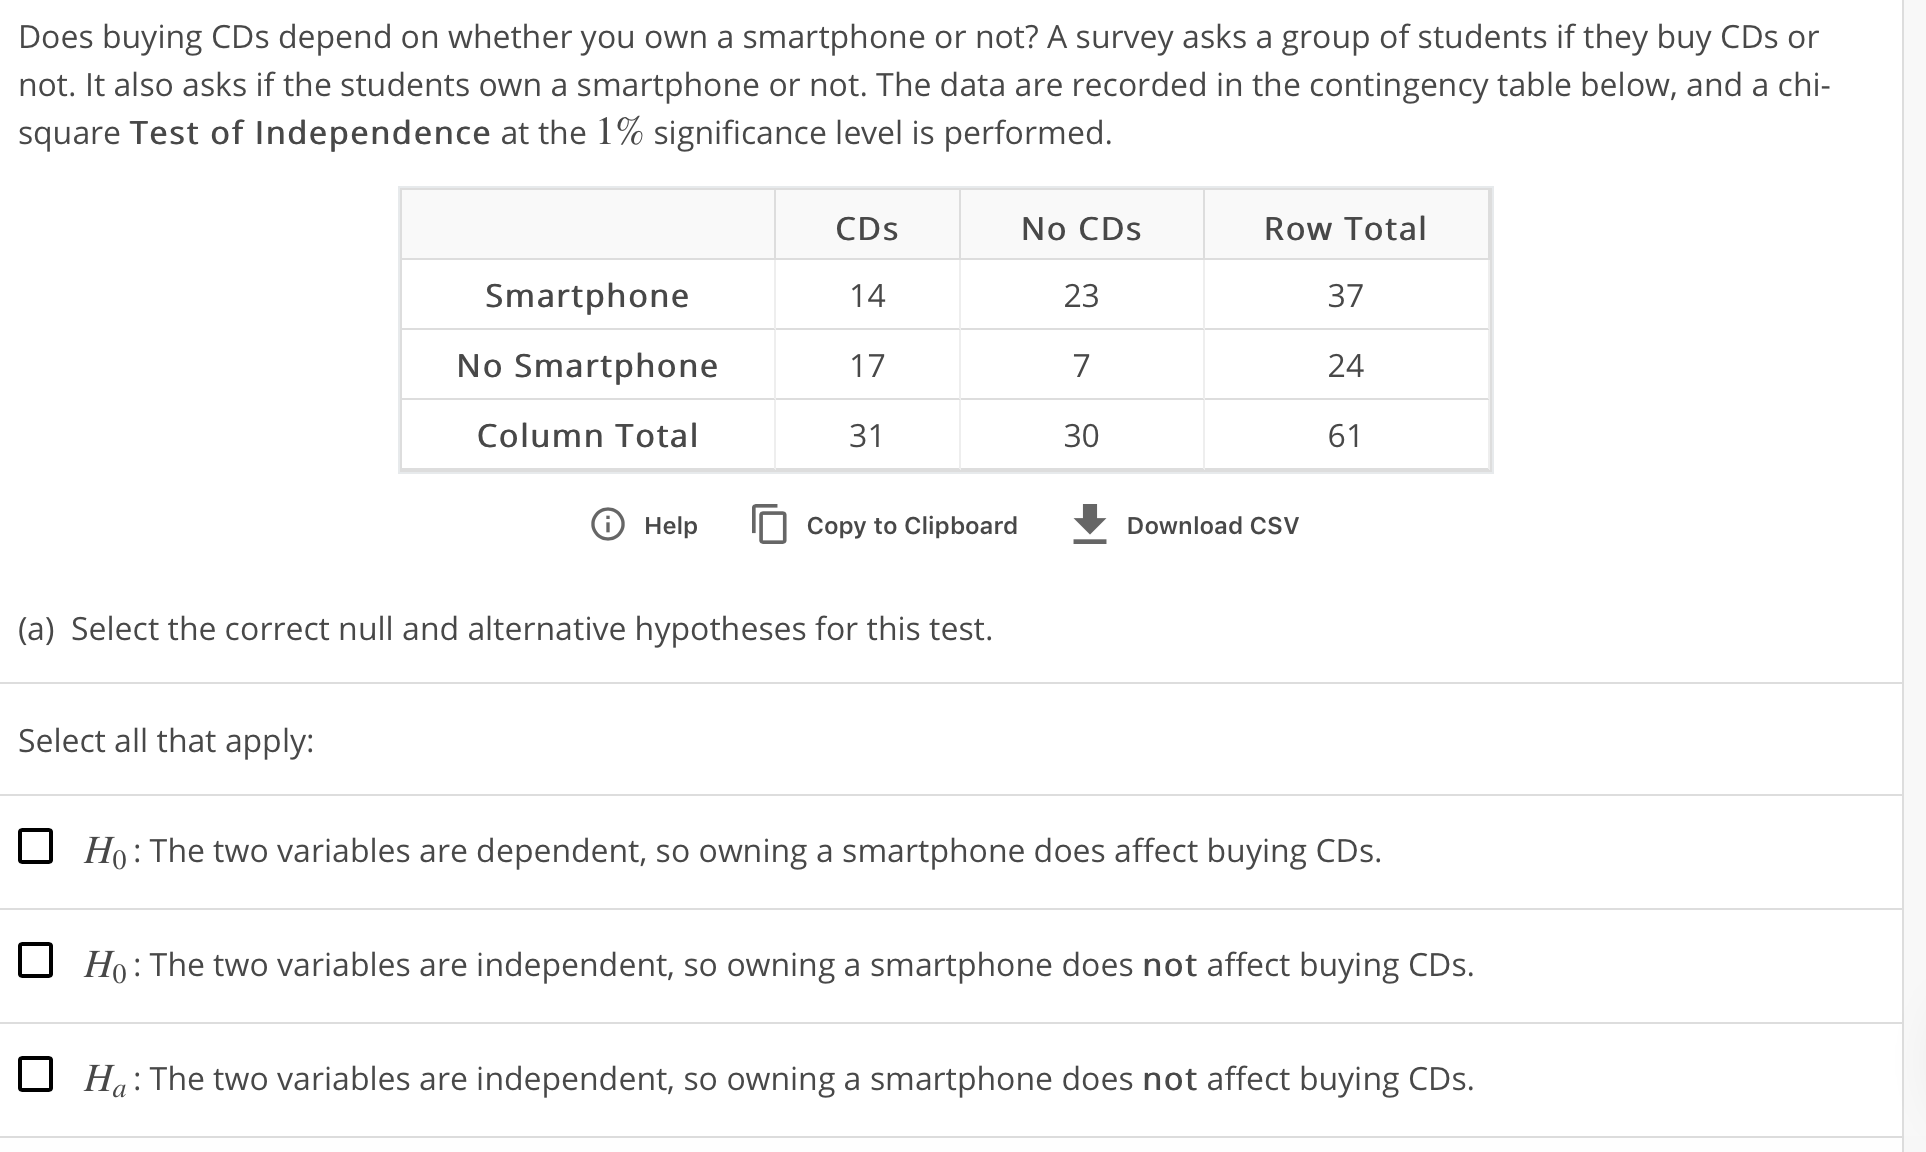 Does buying CDs depend on whether you own a smartphone or not? A survey asks a group of students if they buy CDs or
not. It also asks if the students own a smartphone or not. The data are recorded in the contingency table below, and a chi-
square Test of Independence at the 1% significance level is performed
No CDs
23
7
30
Row Total
37
24
61
CDs
Smartphone
No Smartphone
Column Total
31
T Help Copy to Clipboard
Download CSV
(a) Select the correct null and alternative hypotheses for this test.
Select all that apply
H0 : The two variables are dependent, so owning a smartphone does affect buying CDs.
Ho:The two variables are independent, so owning a smartphone does not affect buying CDs
Ha: The two variables are independent, so owning a smartphone does not affect buying CDs
